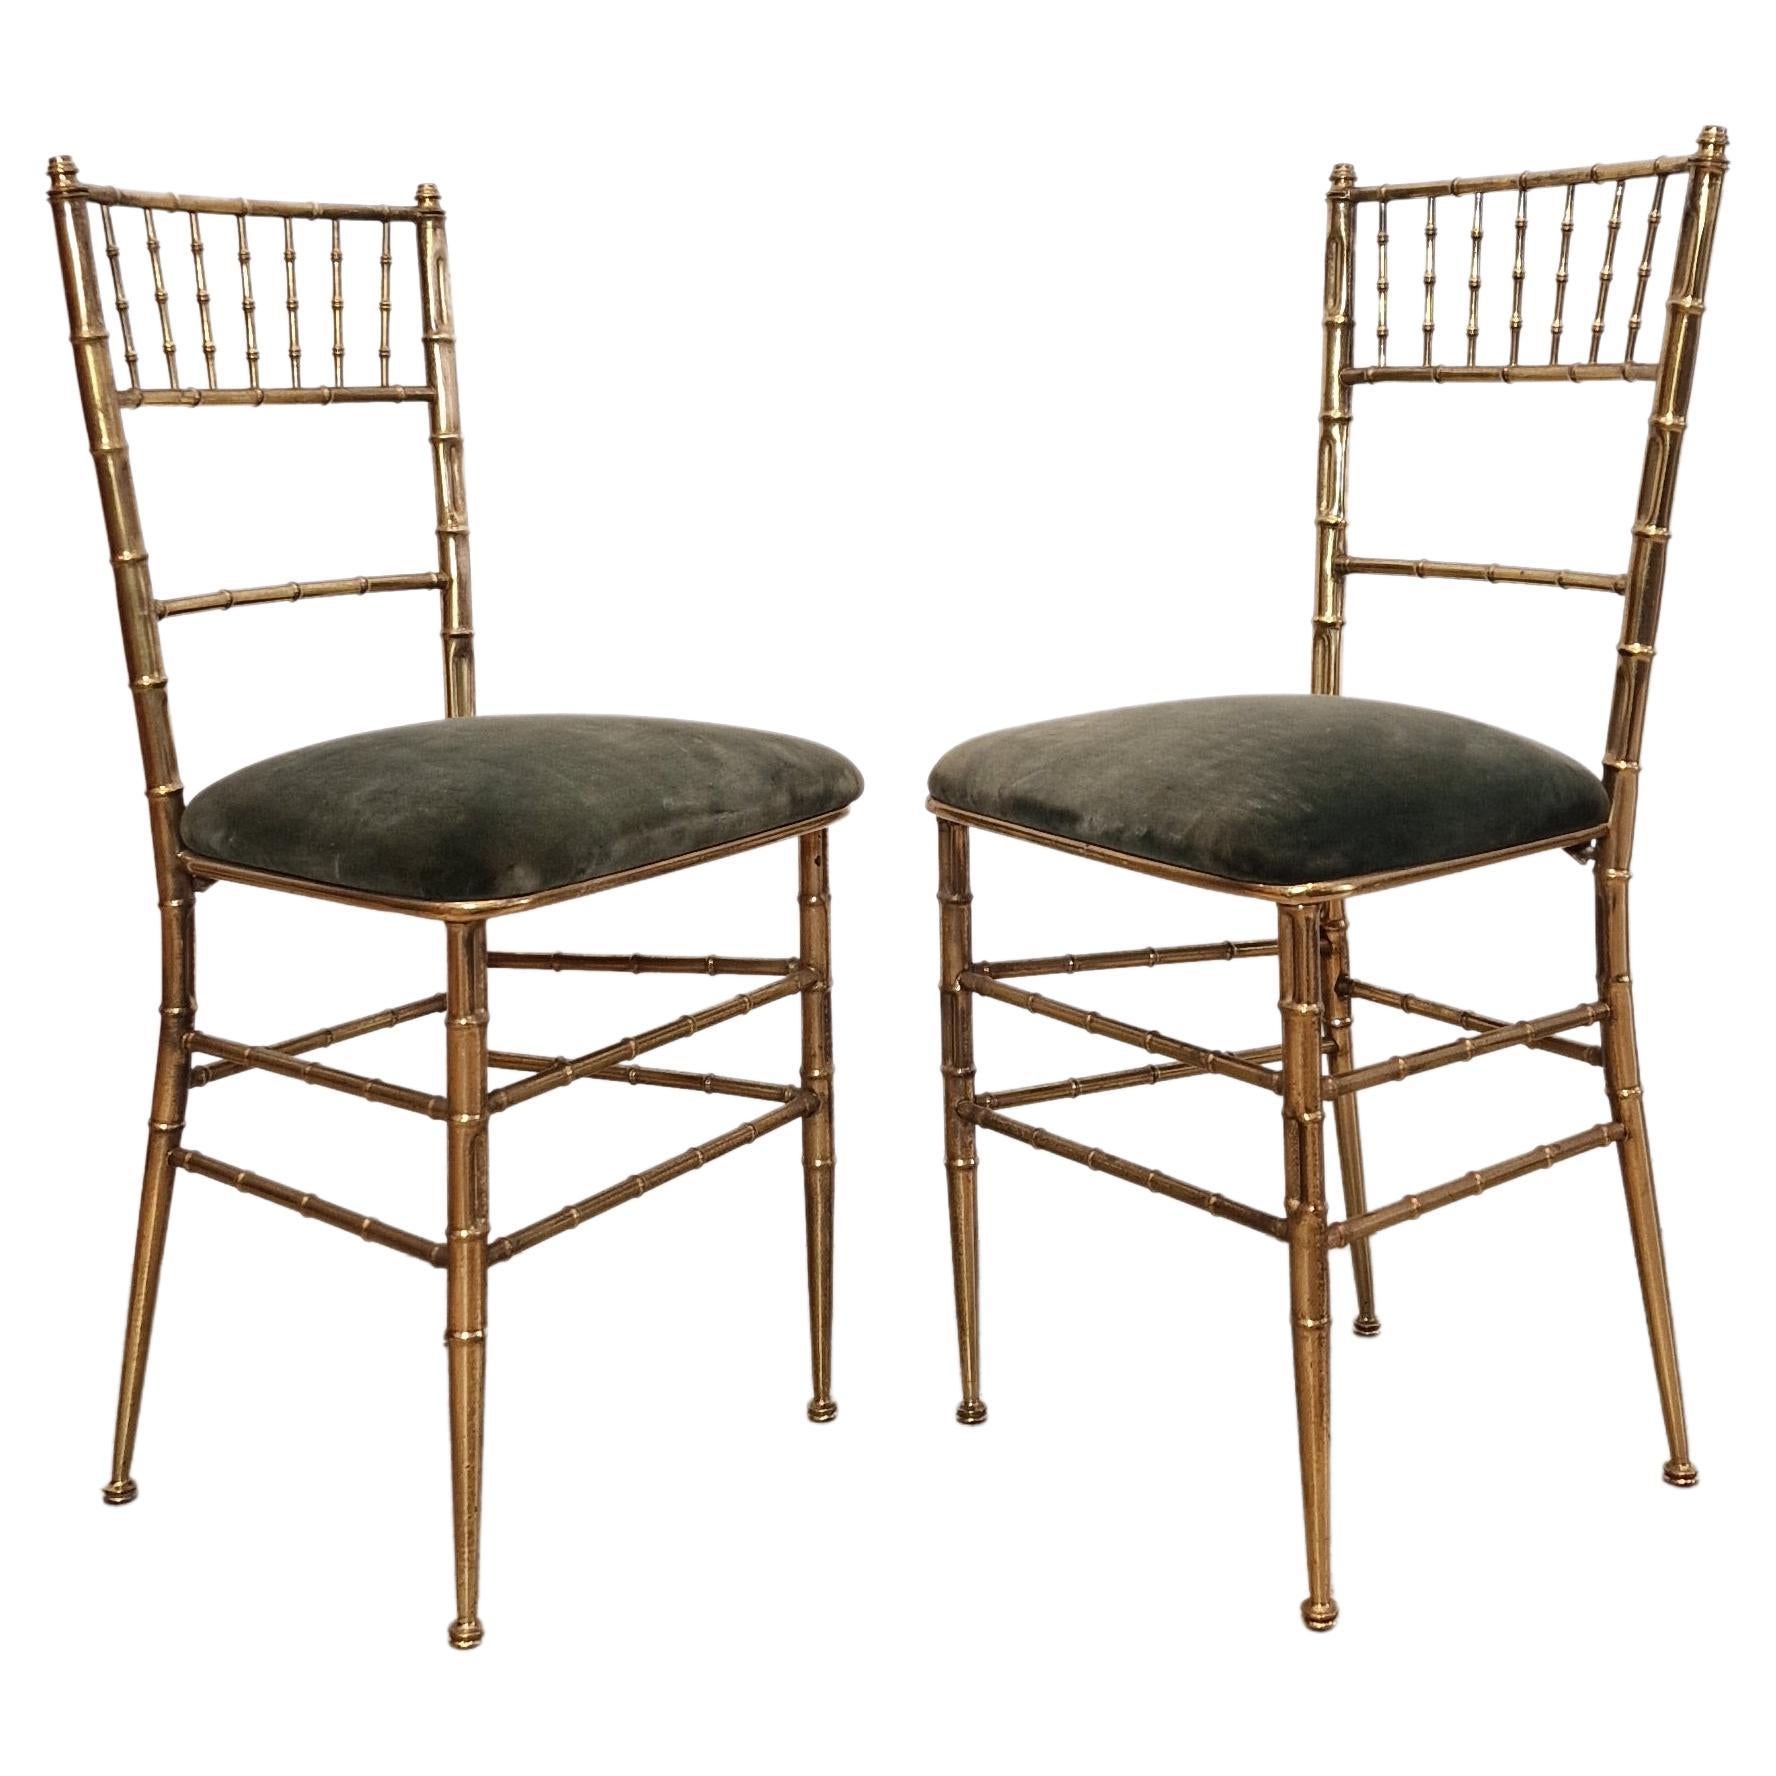 Pair of Faux Bamboo Opera Chairs, 1940s, French For Sale